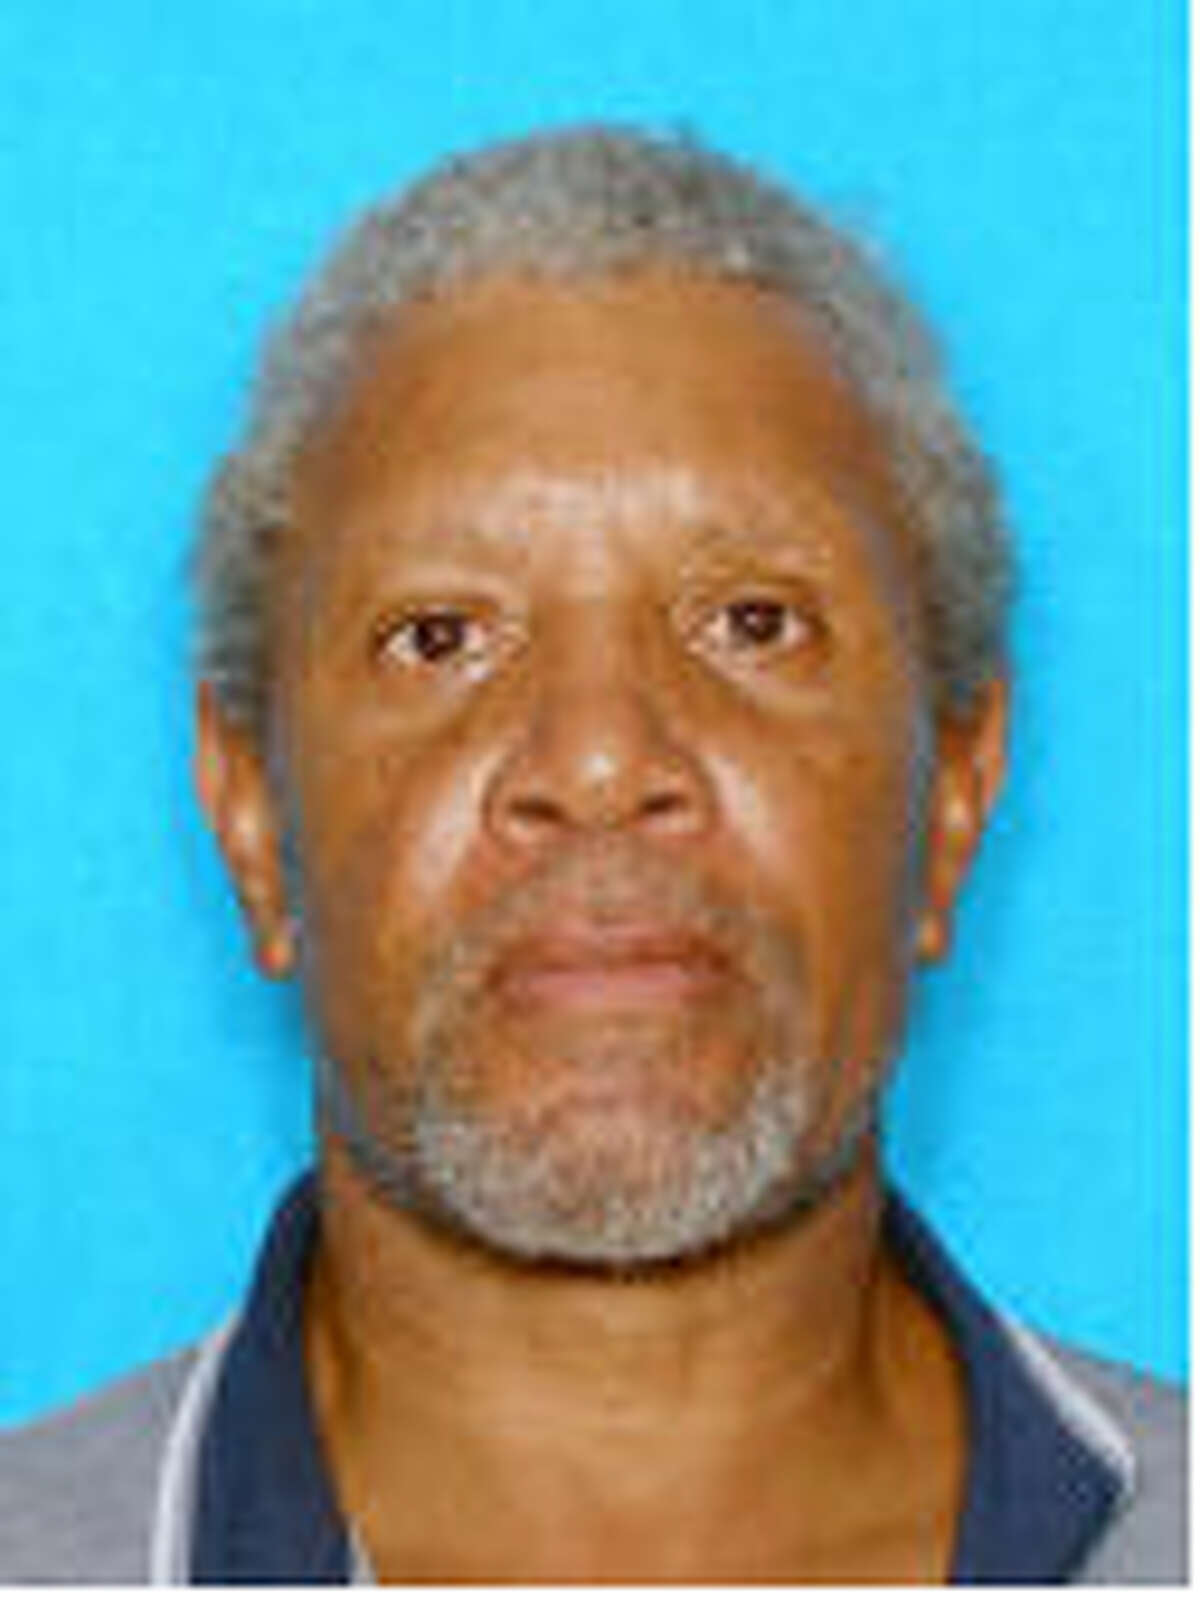 Terry Jackson, 60, is accused of fatally stabbing a retired Marine 15 times.